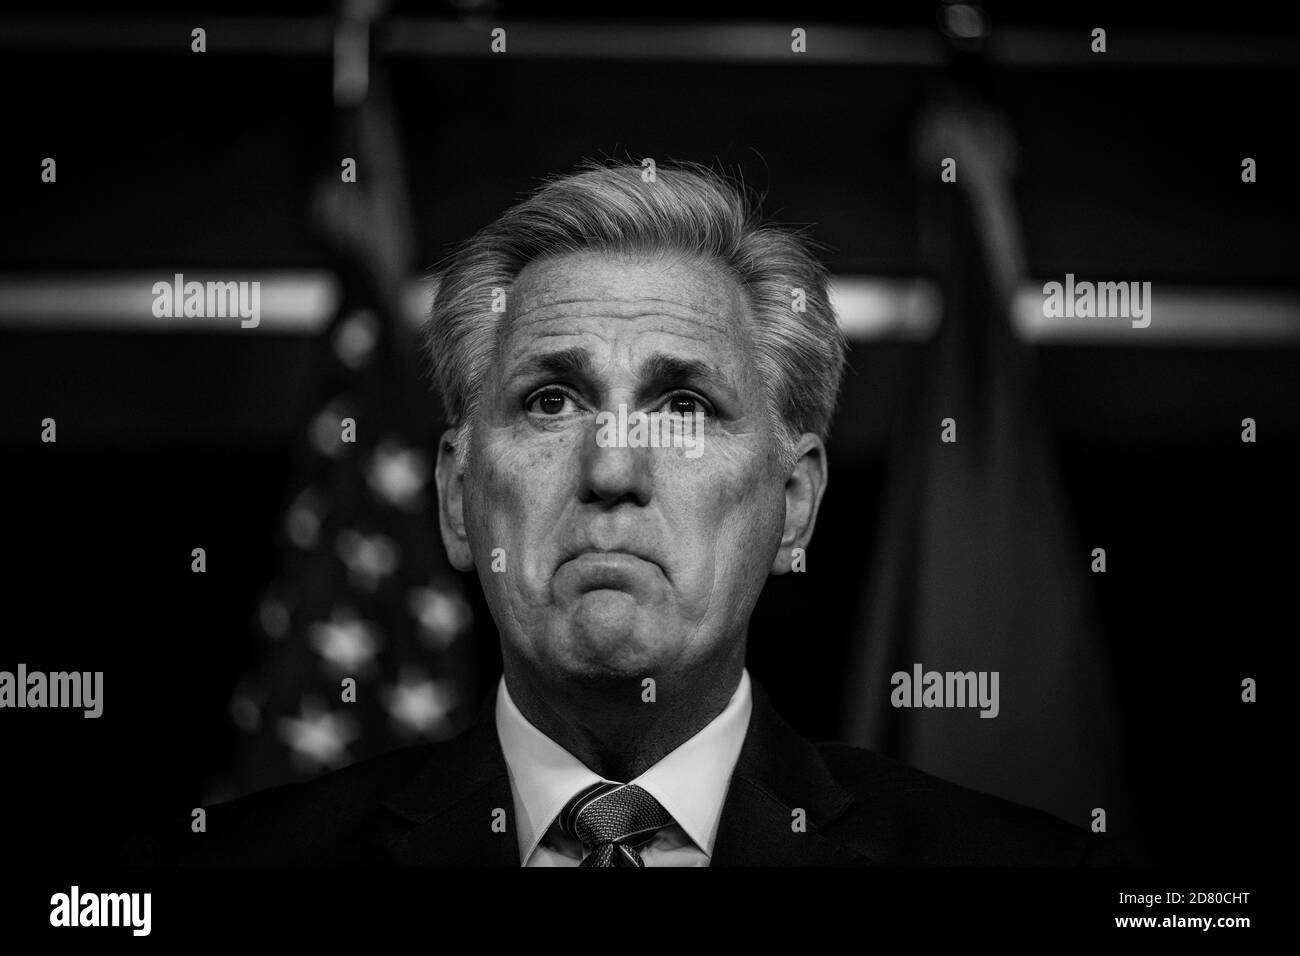 U.S. House Minority Leader Kevin McCarthy, a Republican from California, speaks to members of the media during his weekly news conference in Washington, D.C., U.S., on Thursday, Sept. 26, 2019. McCarthy said that the House Democrats have made the country less safe after starting the impeachment process against President Donald Trump. Credit: Alex Edelman/The Photo Access Stock Photo